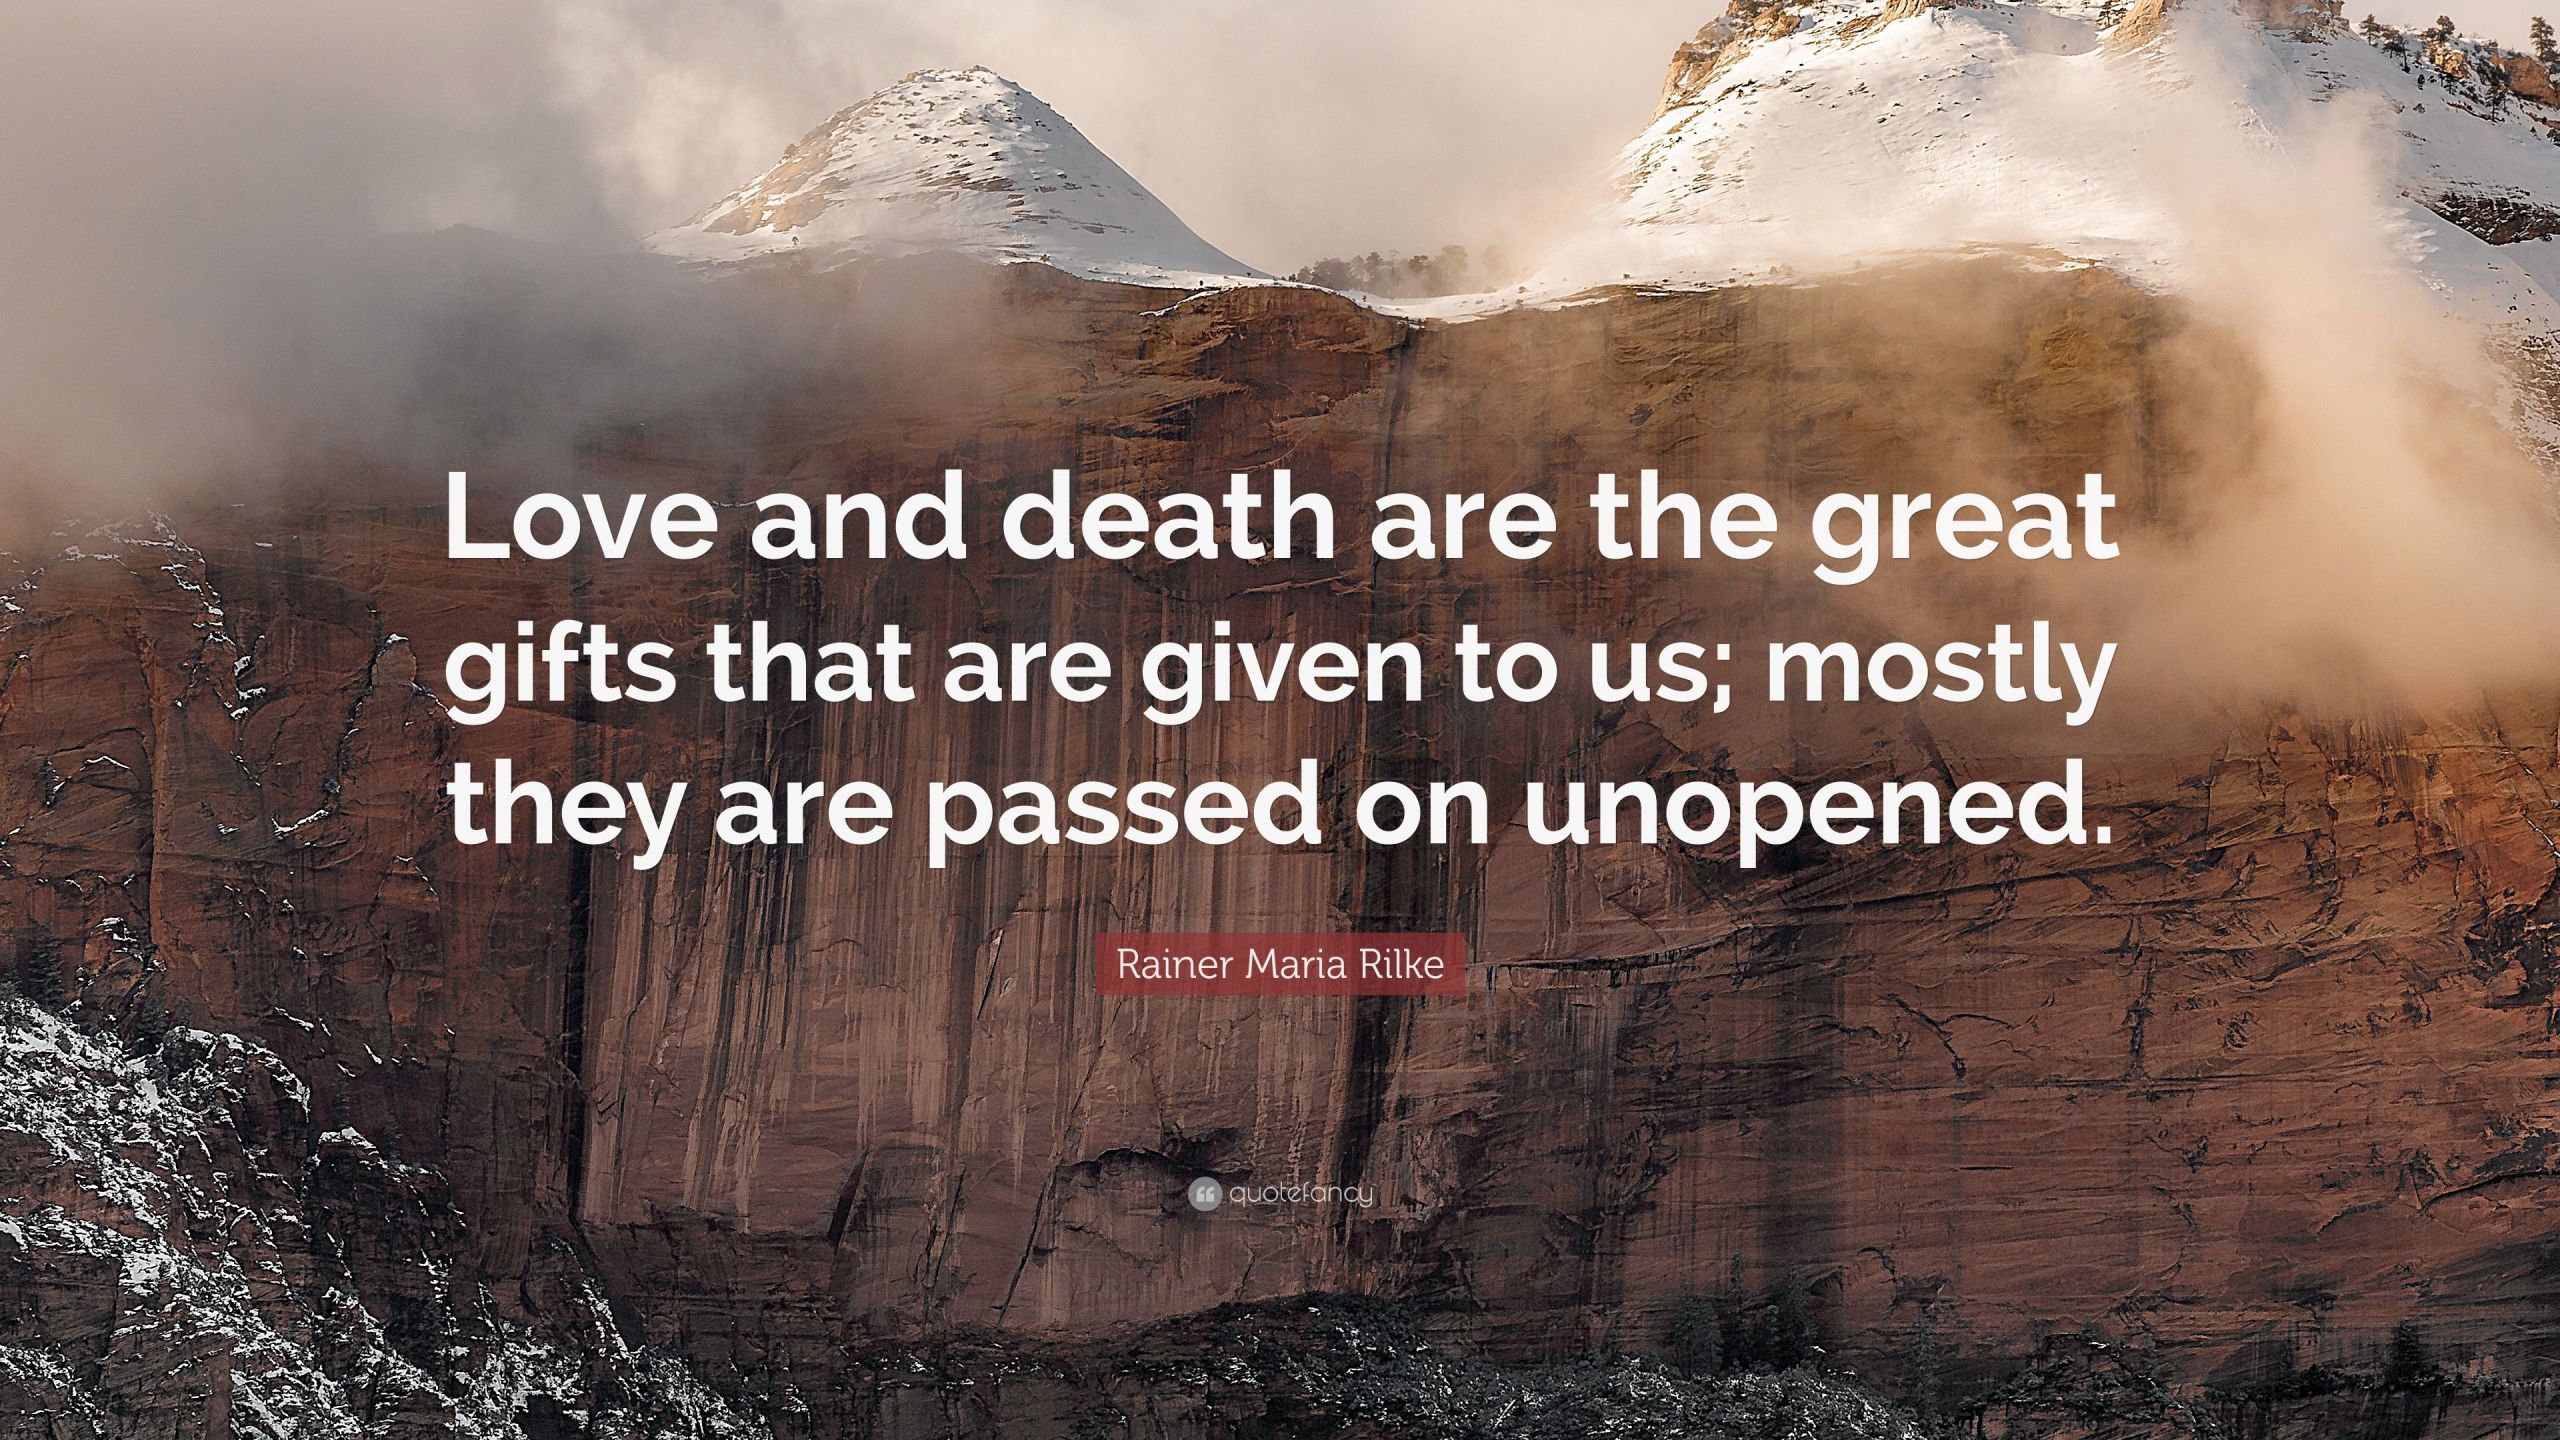 Quotes About Love And Death
 Rainer Maria Rilke Quote “Love and are the great